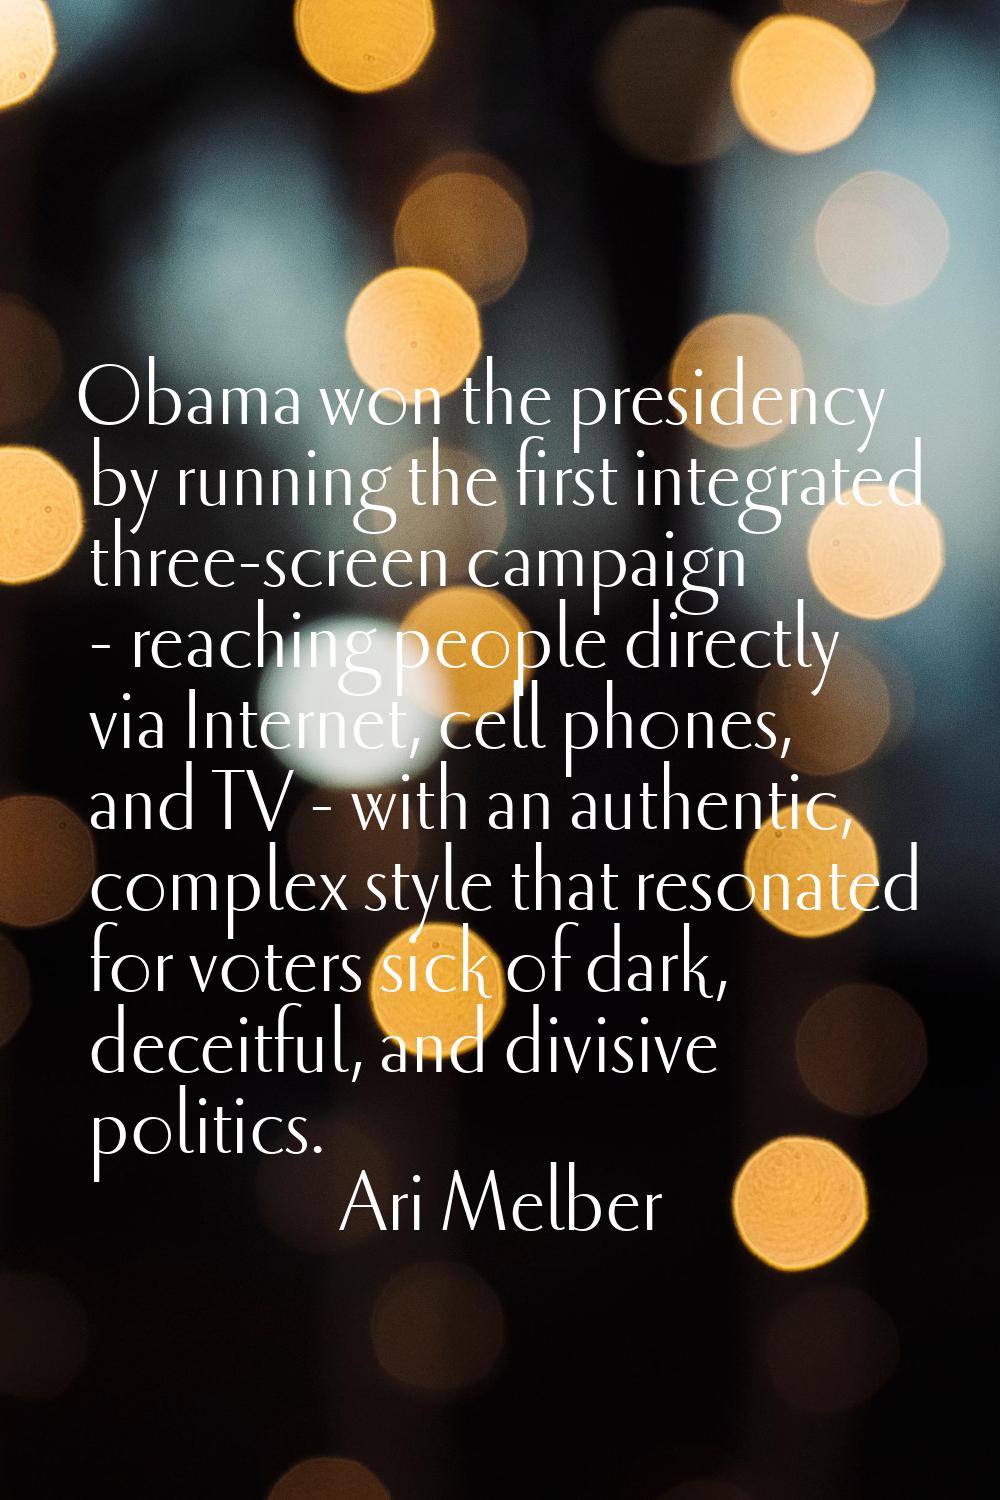 Obama won the presidency by running the first integrated three-screen campaign - reaching people di